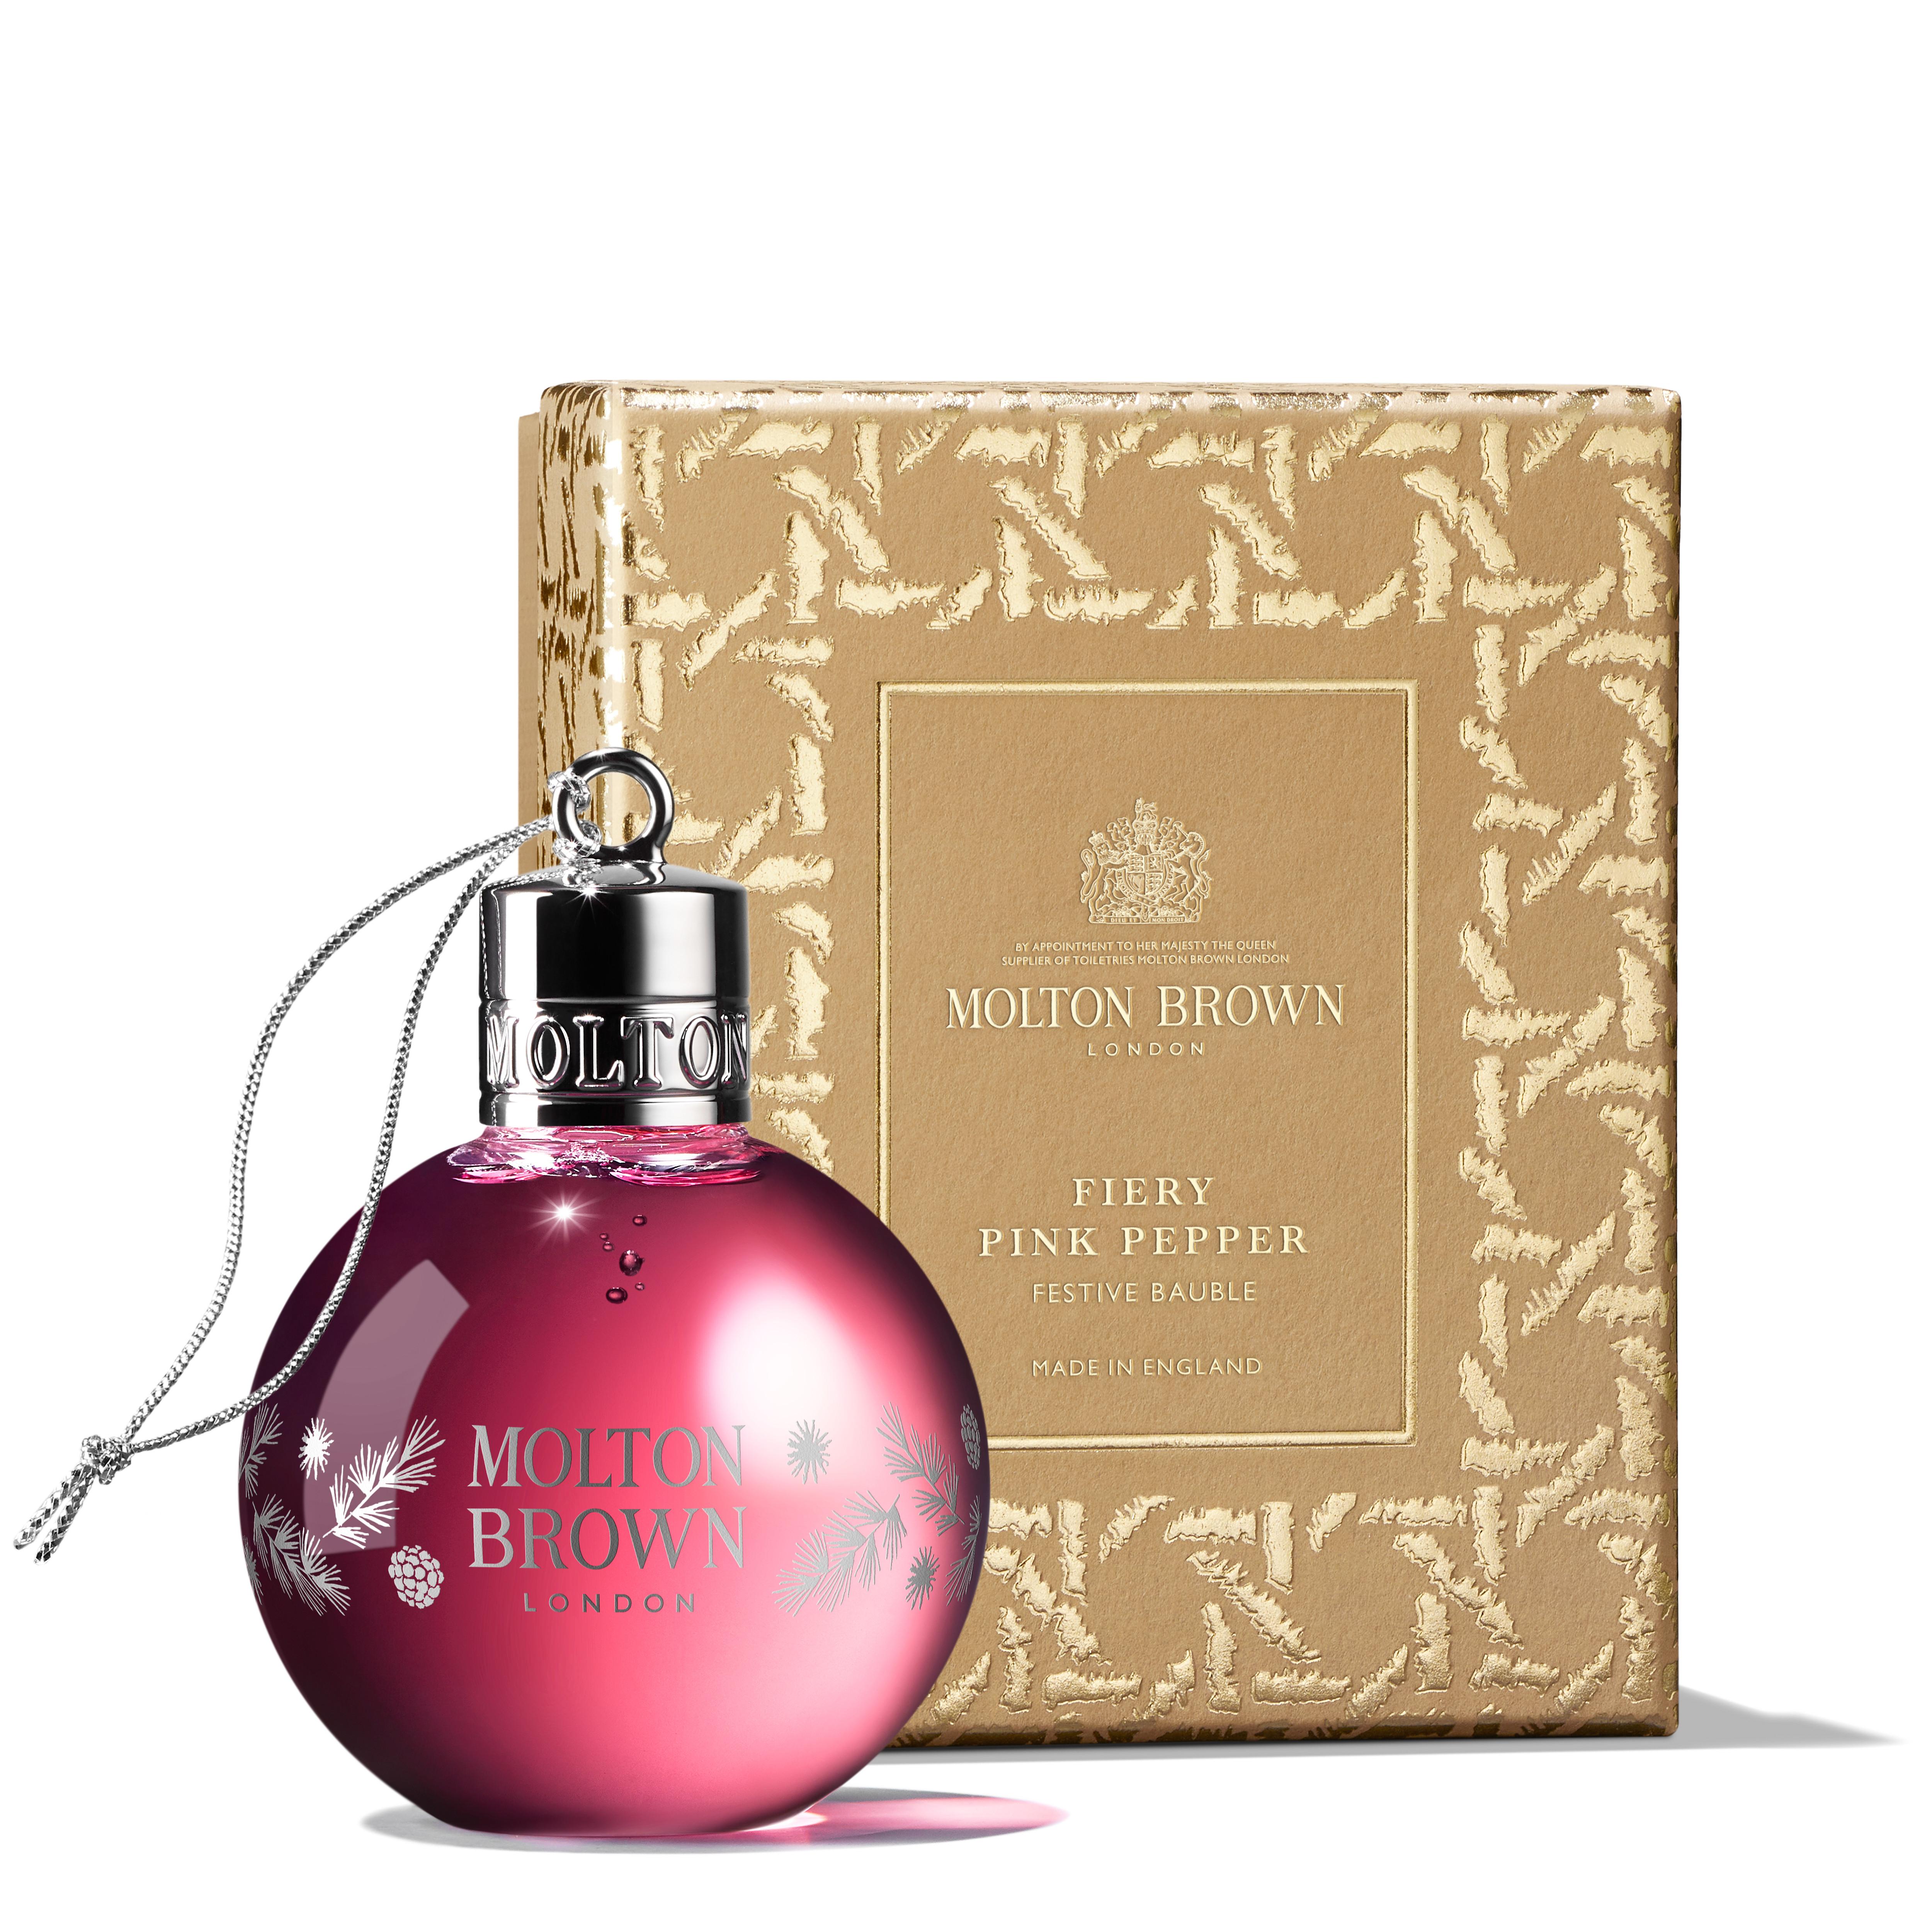 Molton Brown OUTLET Fiery Pink Pepper Festive Bauble